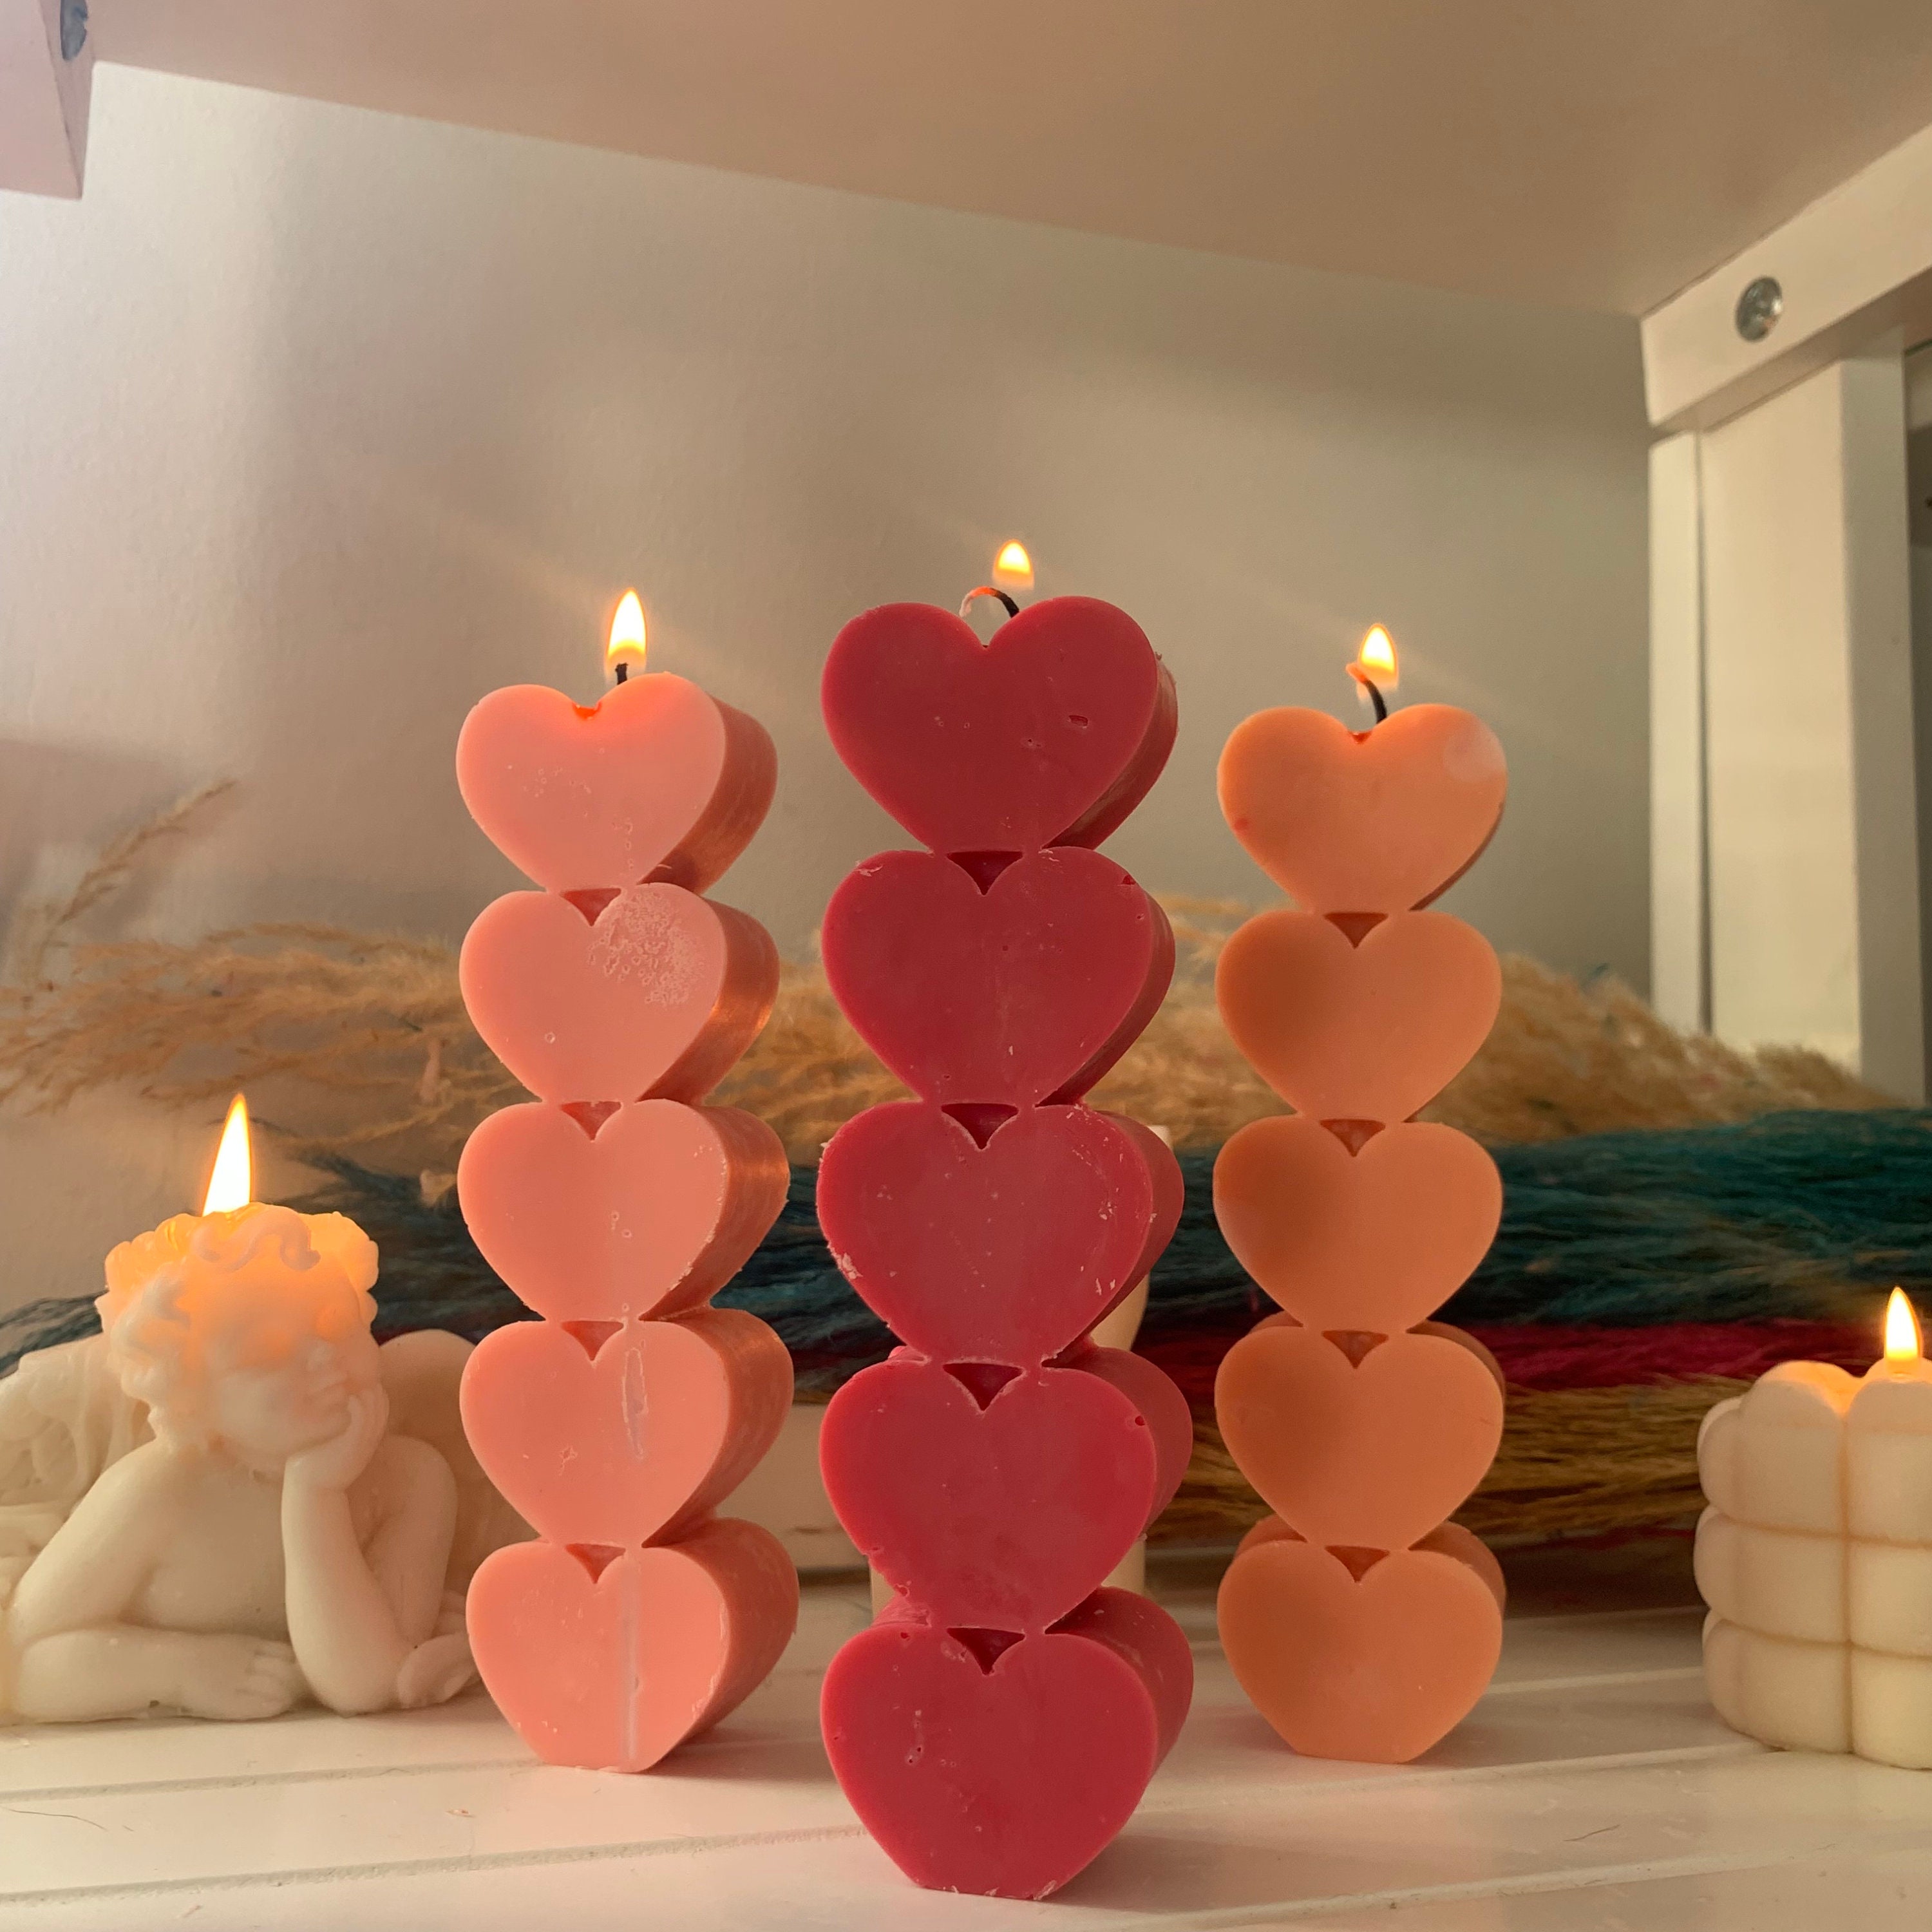 Heart Candle Pillar Candles Home Decor Cute Gifts Personalized Gifts Best  Friend Giftsheart Shaped Candlescented Pillar Candle 